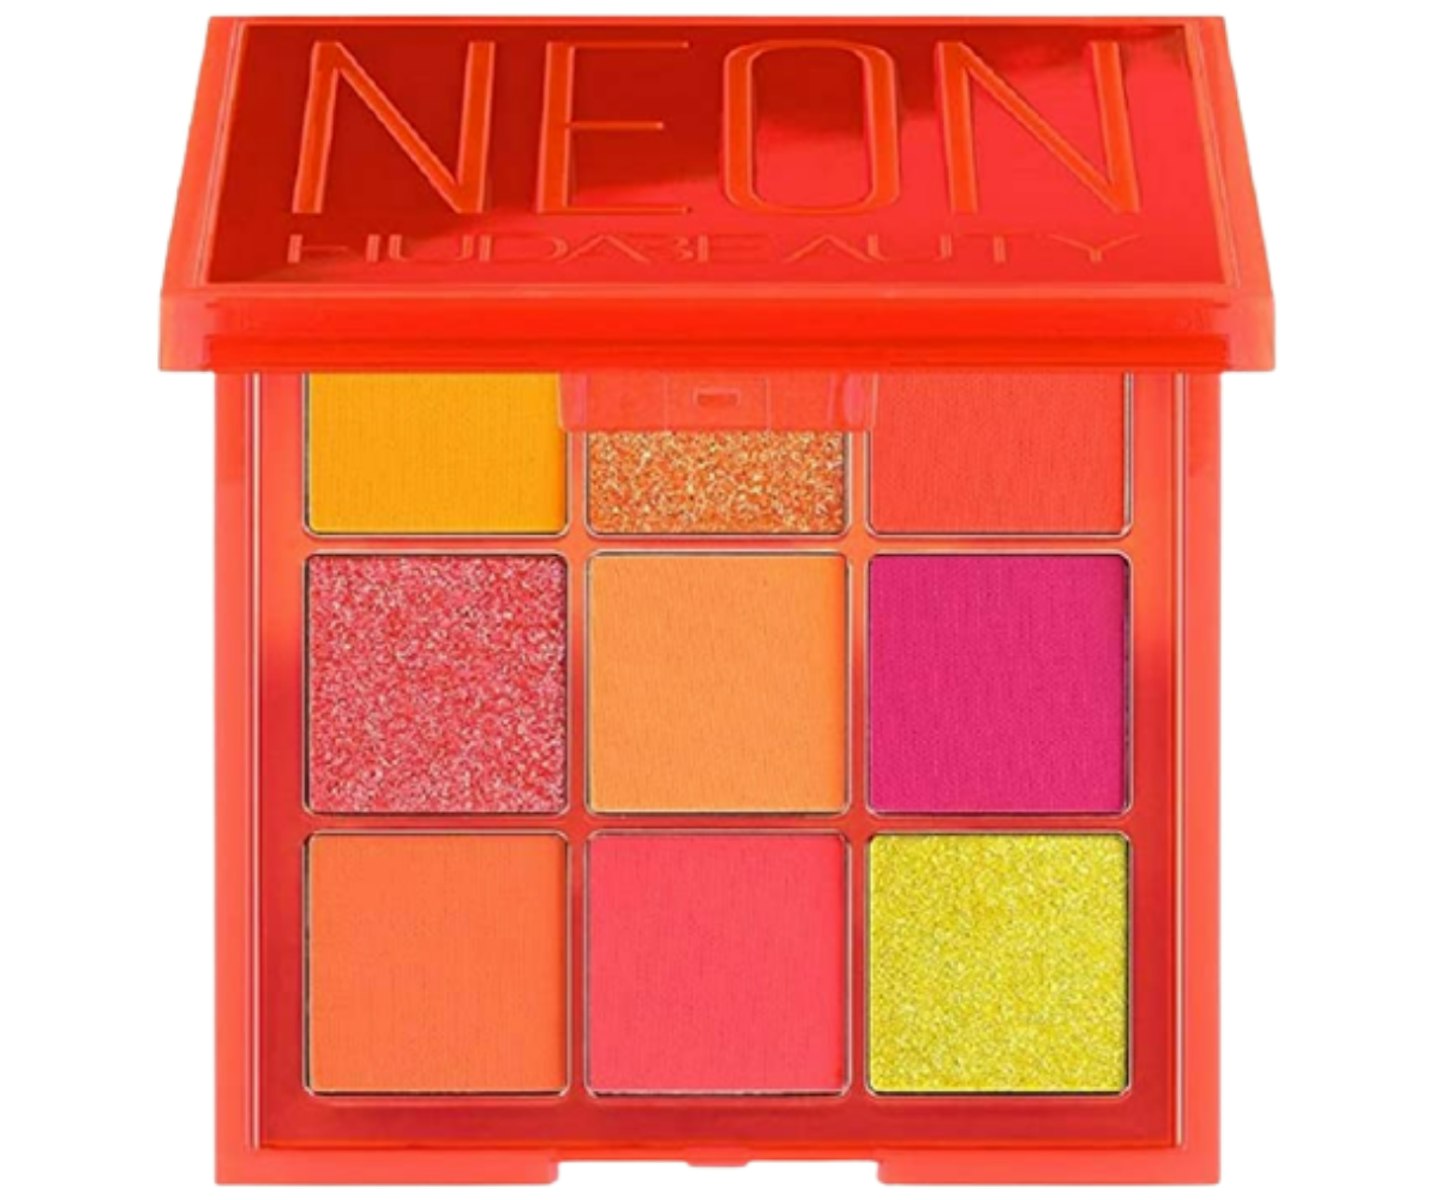 A picture of the Huda Beauty Neon Obsessions Eyeshadow Palette - Neon Orange.